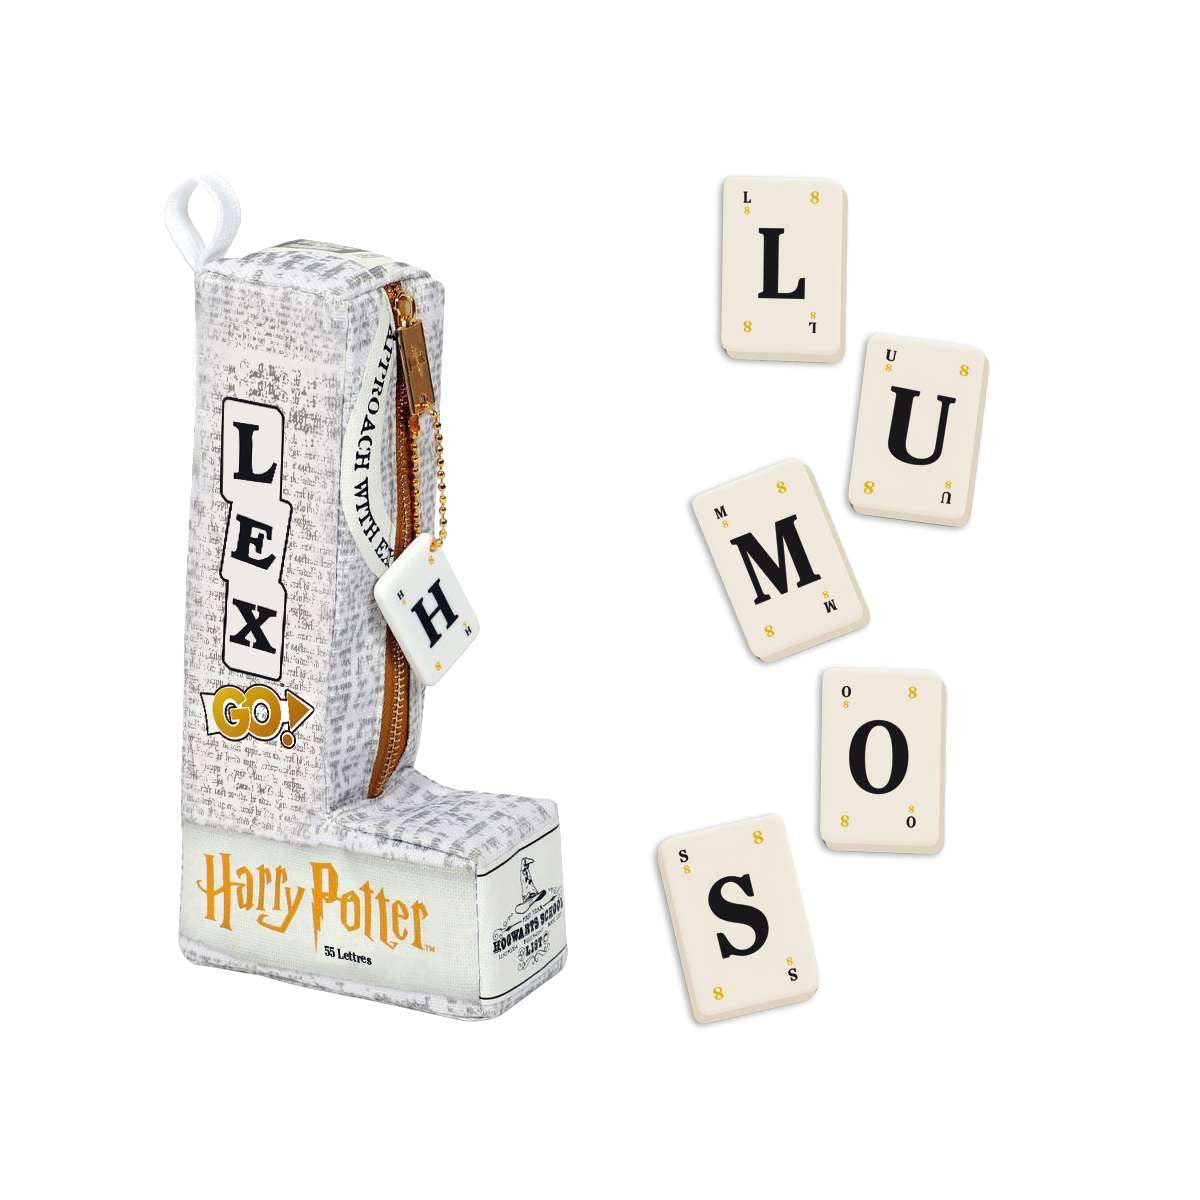 LEX GO 55 Letters - Harry Potter - Board Game - French Version